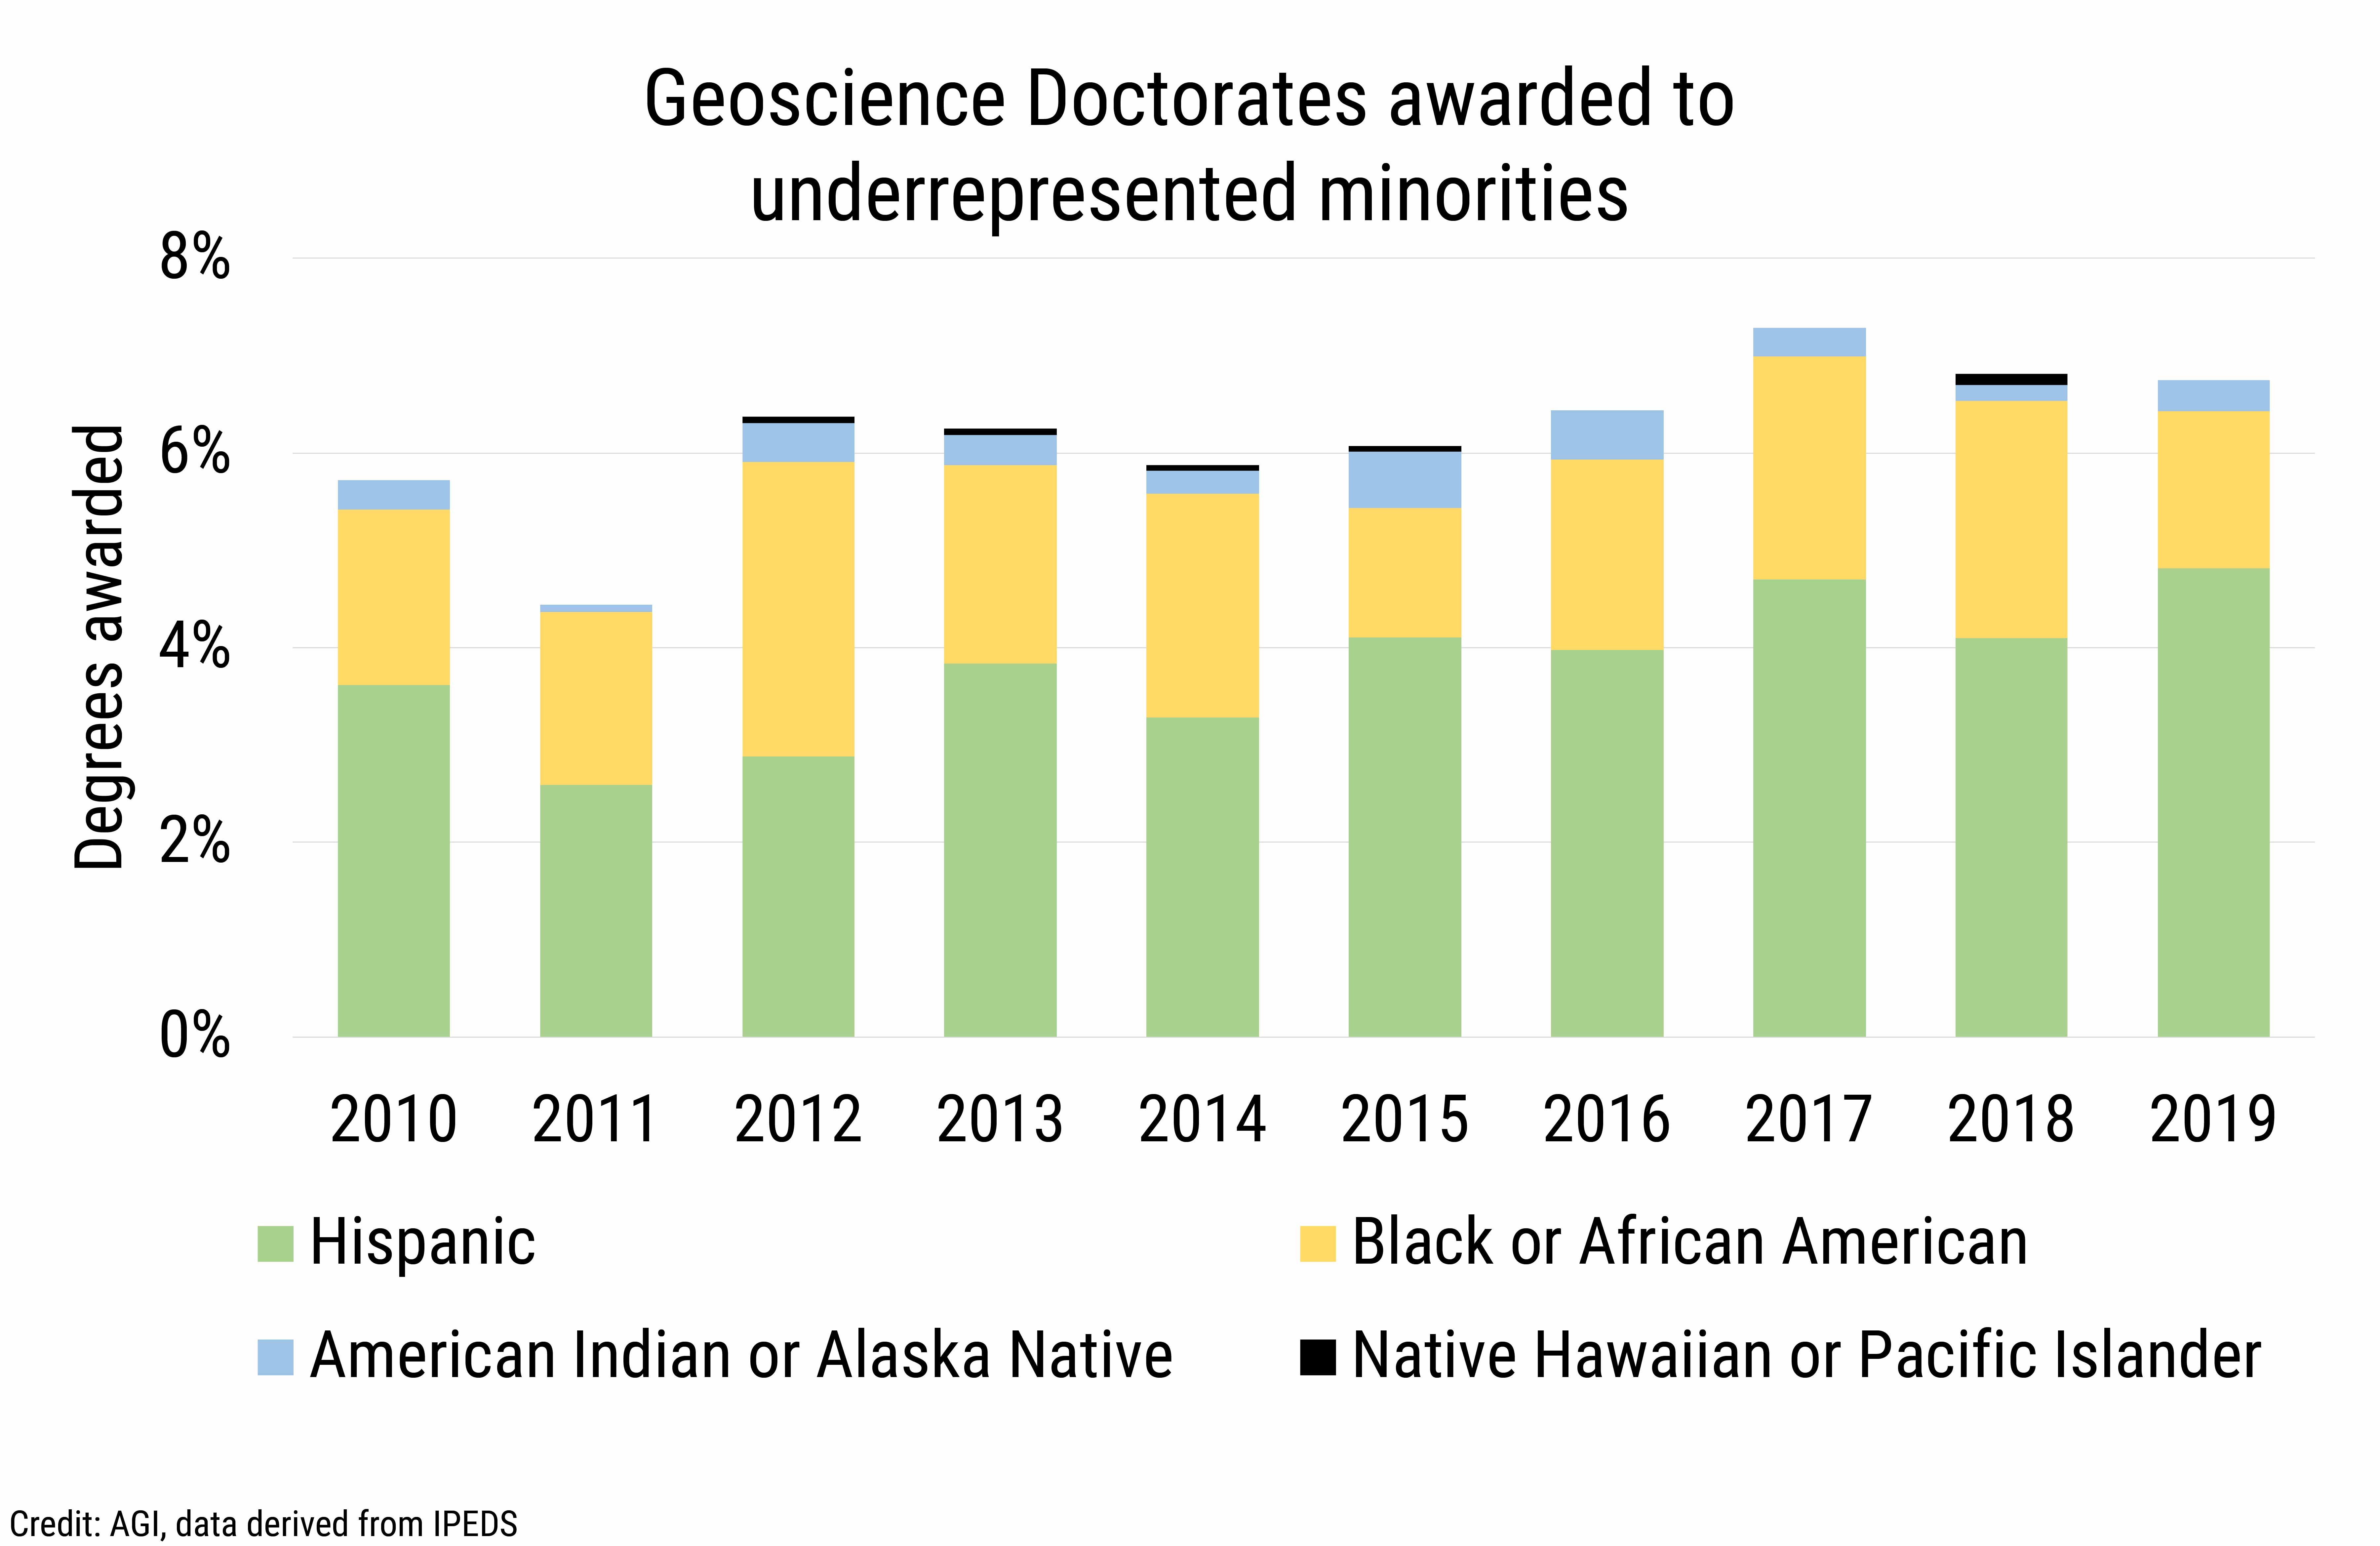 DB2020-023 chart10-Geoscience Doctorates awarded to underrepresented minorities (Credit: AGI, data derived from IPEDS)